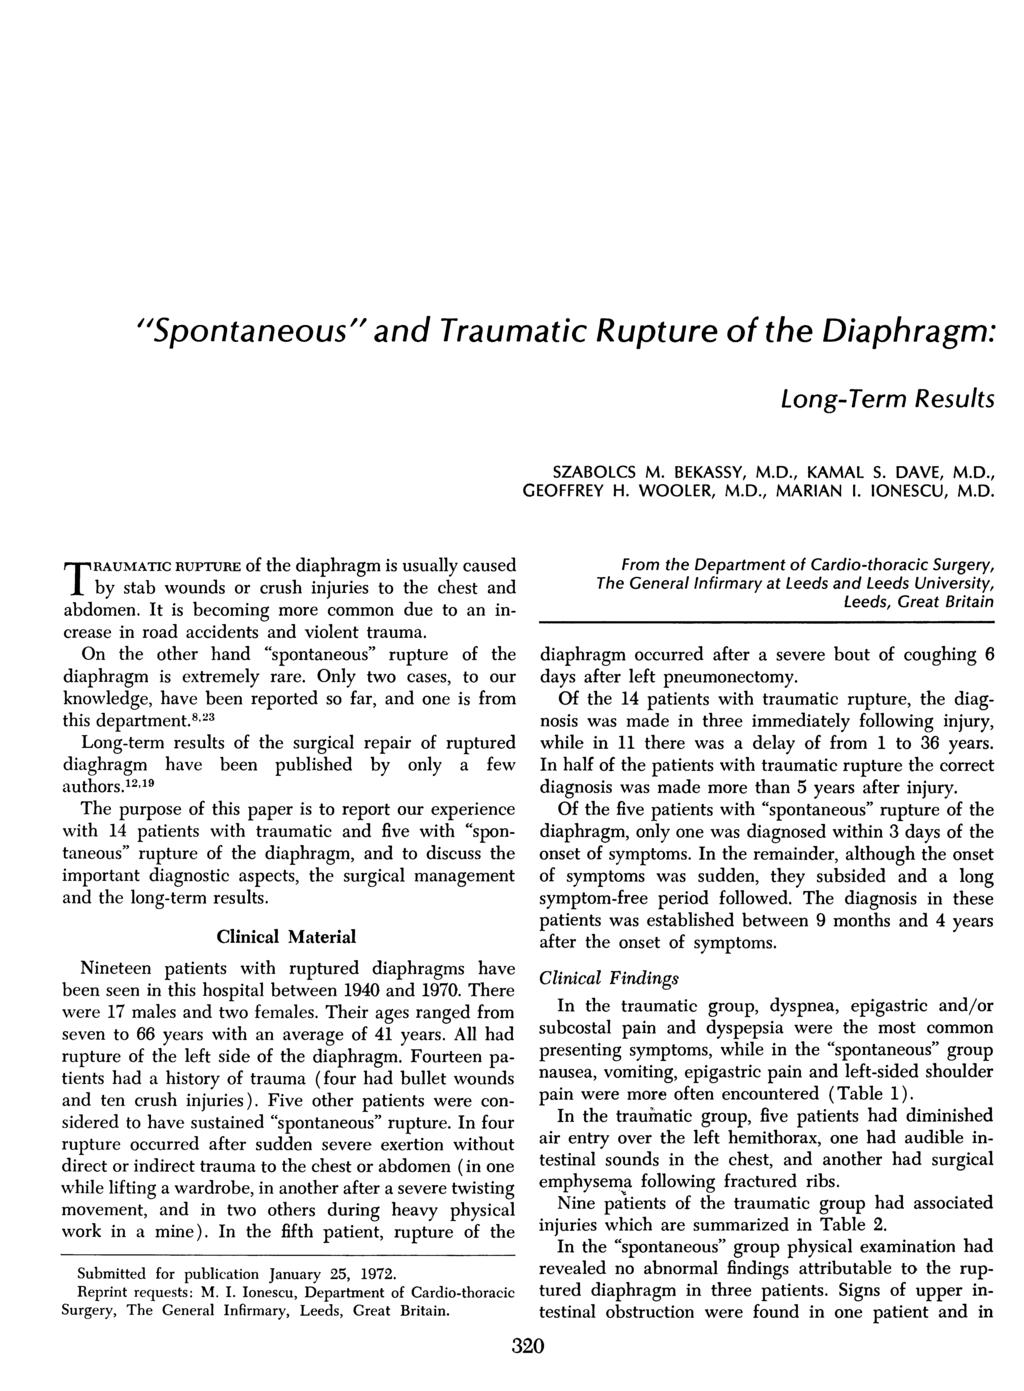 "Spontaneous" and Traumatic Rupture of the Diaphragm: Long-Term Results SZABOLCS M. BEKASSY, M.D., KAMAL S. DAVE, M.D., GEOFFREY H. WOOLER, M.D., MARIAN 1. IONESCU, M.D. TRAUMATIC RUPTURE of the diaphragm is usually caused by stab wounds or crush injuries to the chest and abdomen.